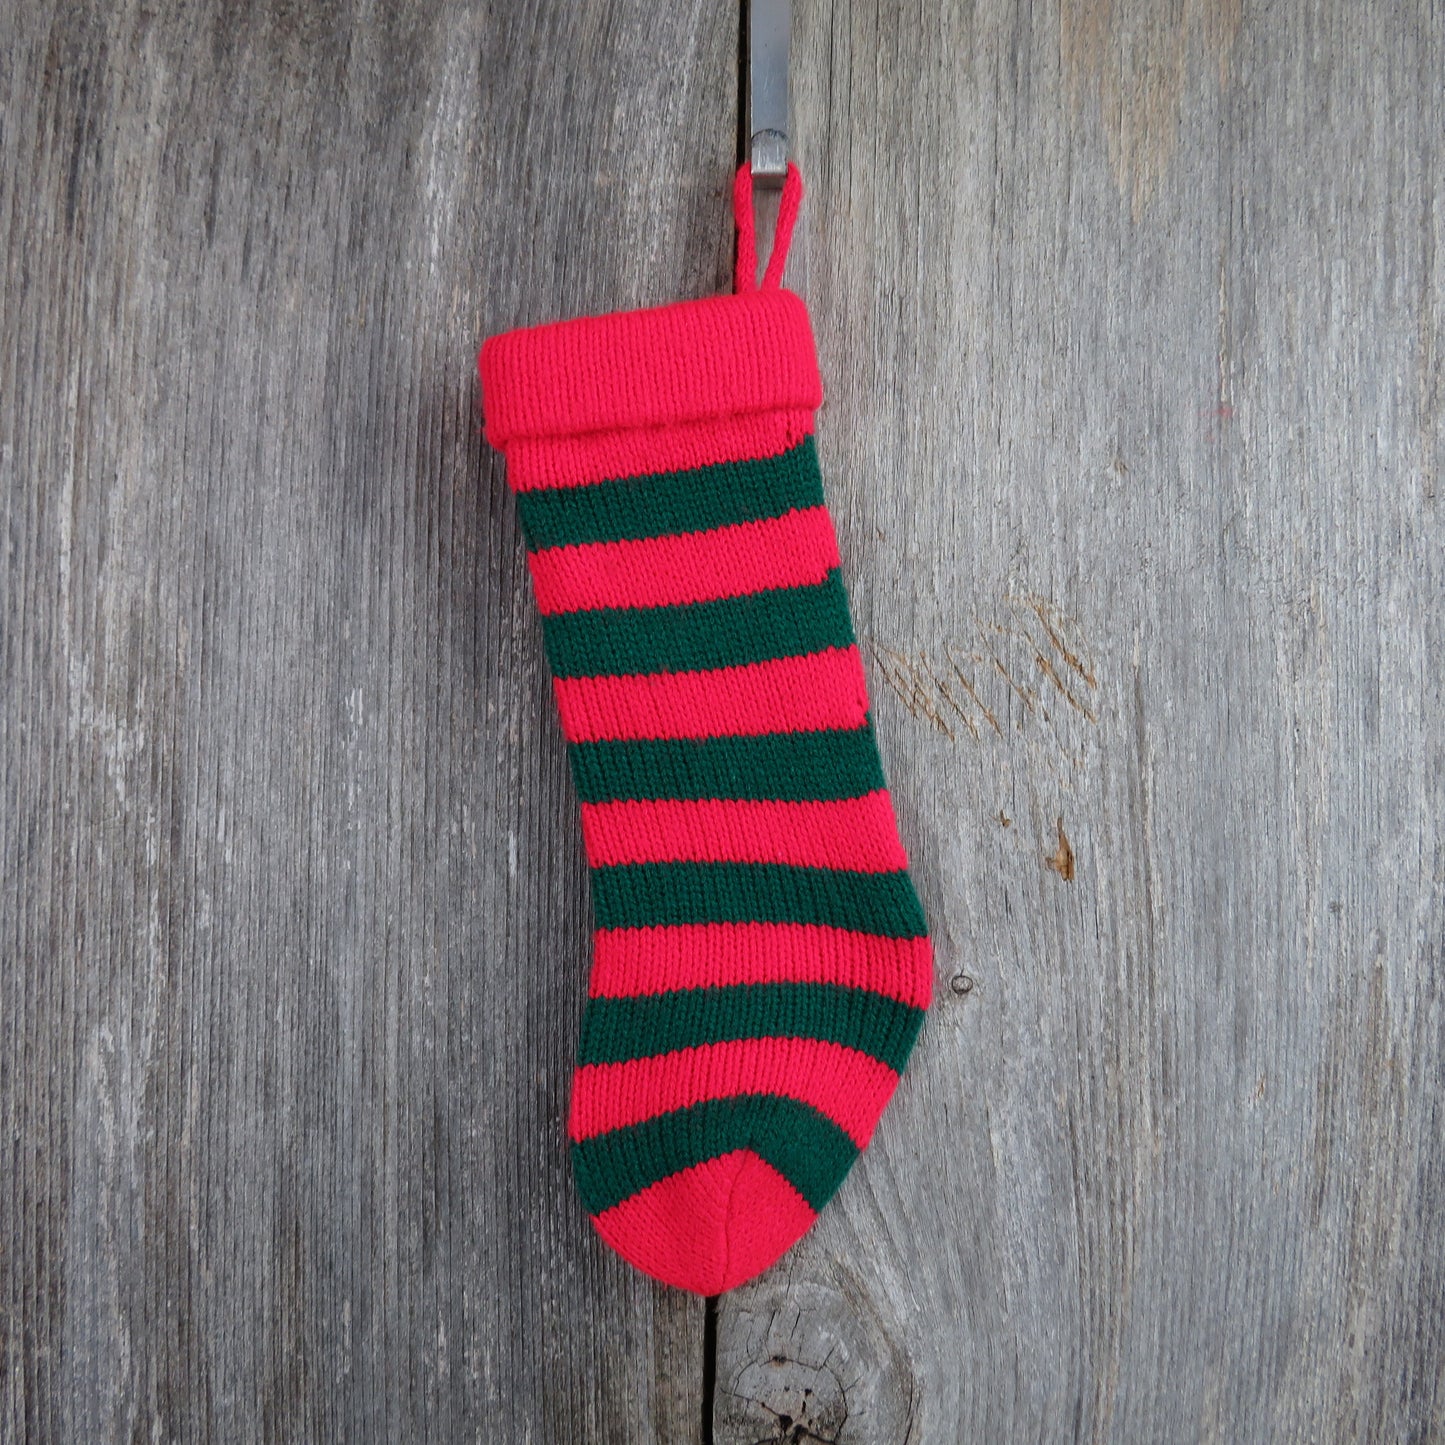 Vintage Mini Christmas Stocking Knitted Knit Striped Red Green Pet Gift Bag - At Grandma's Table